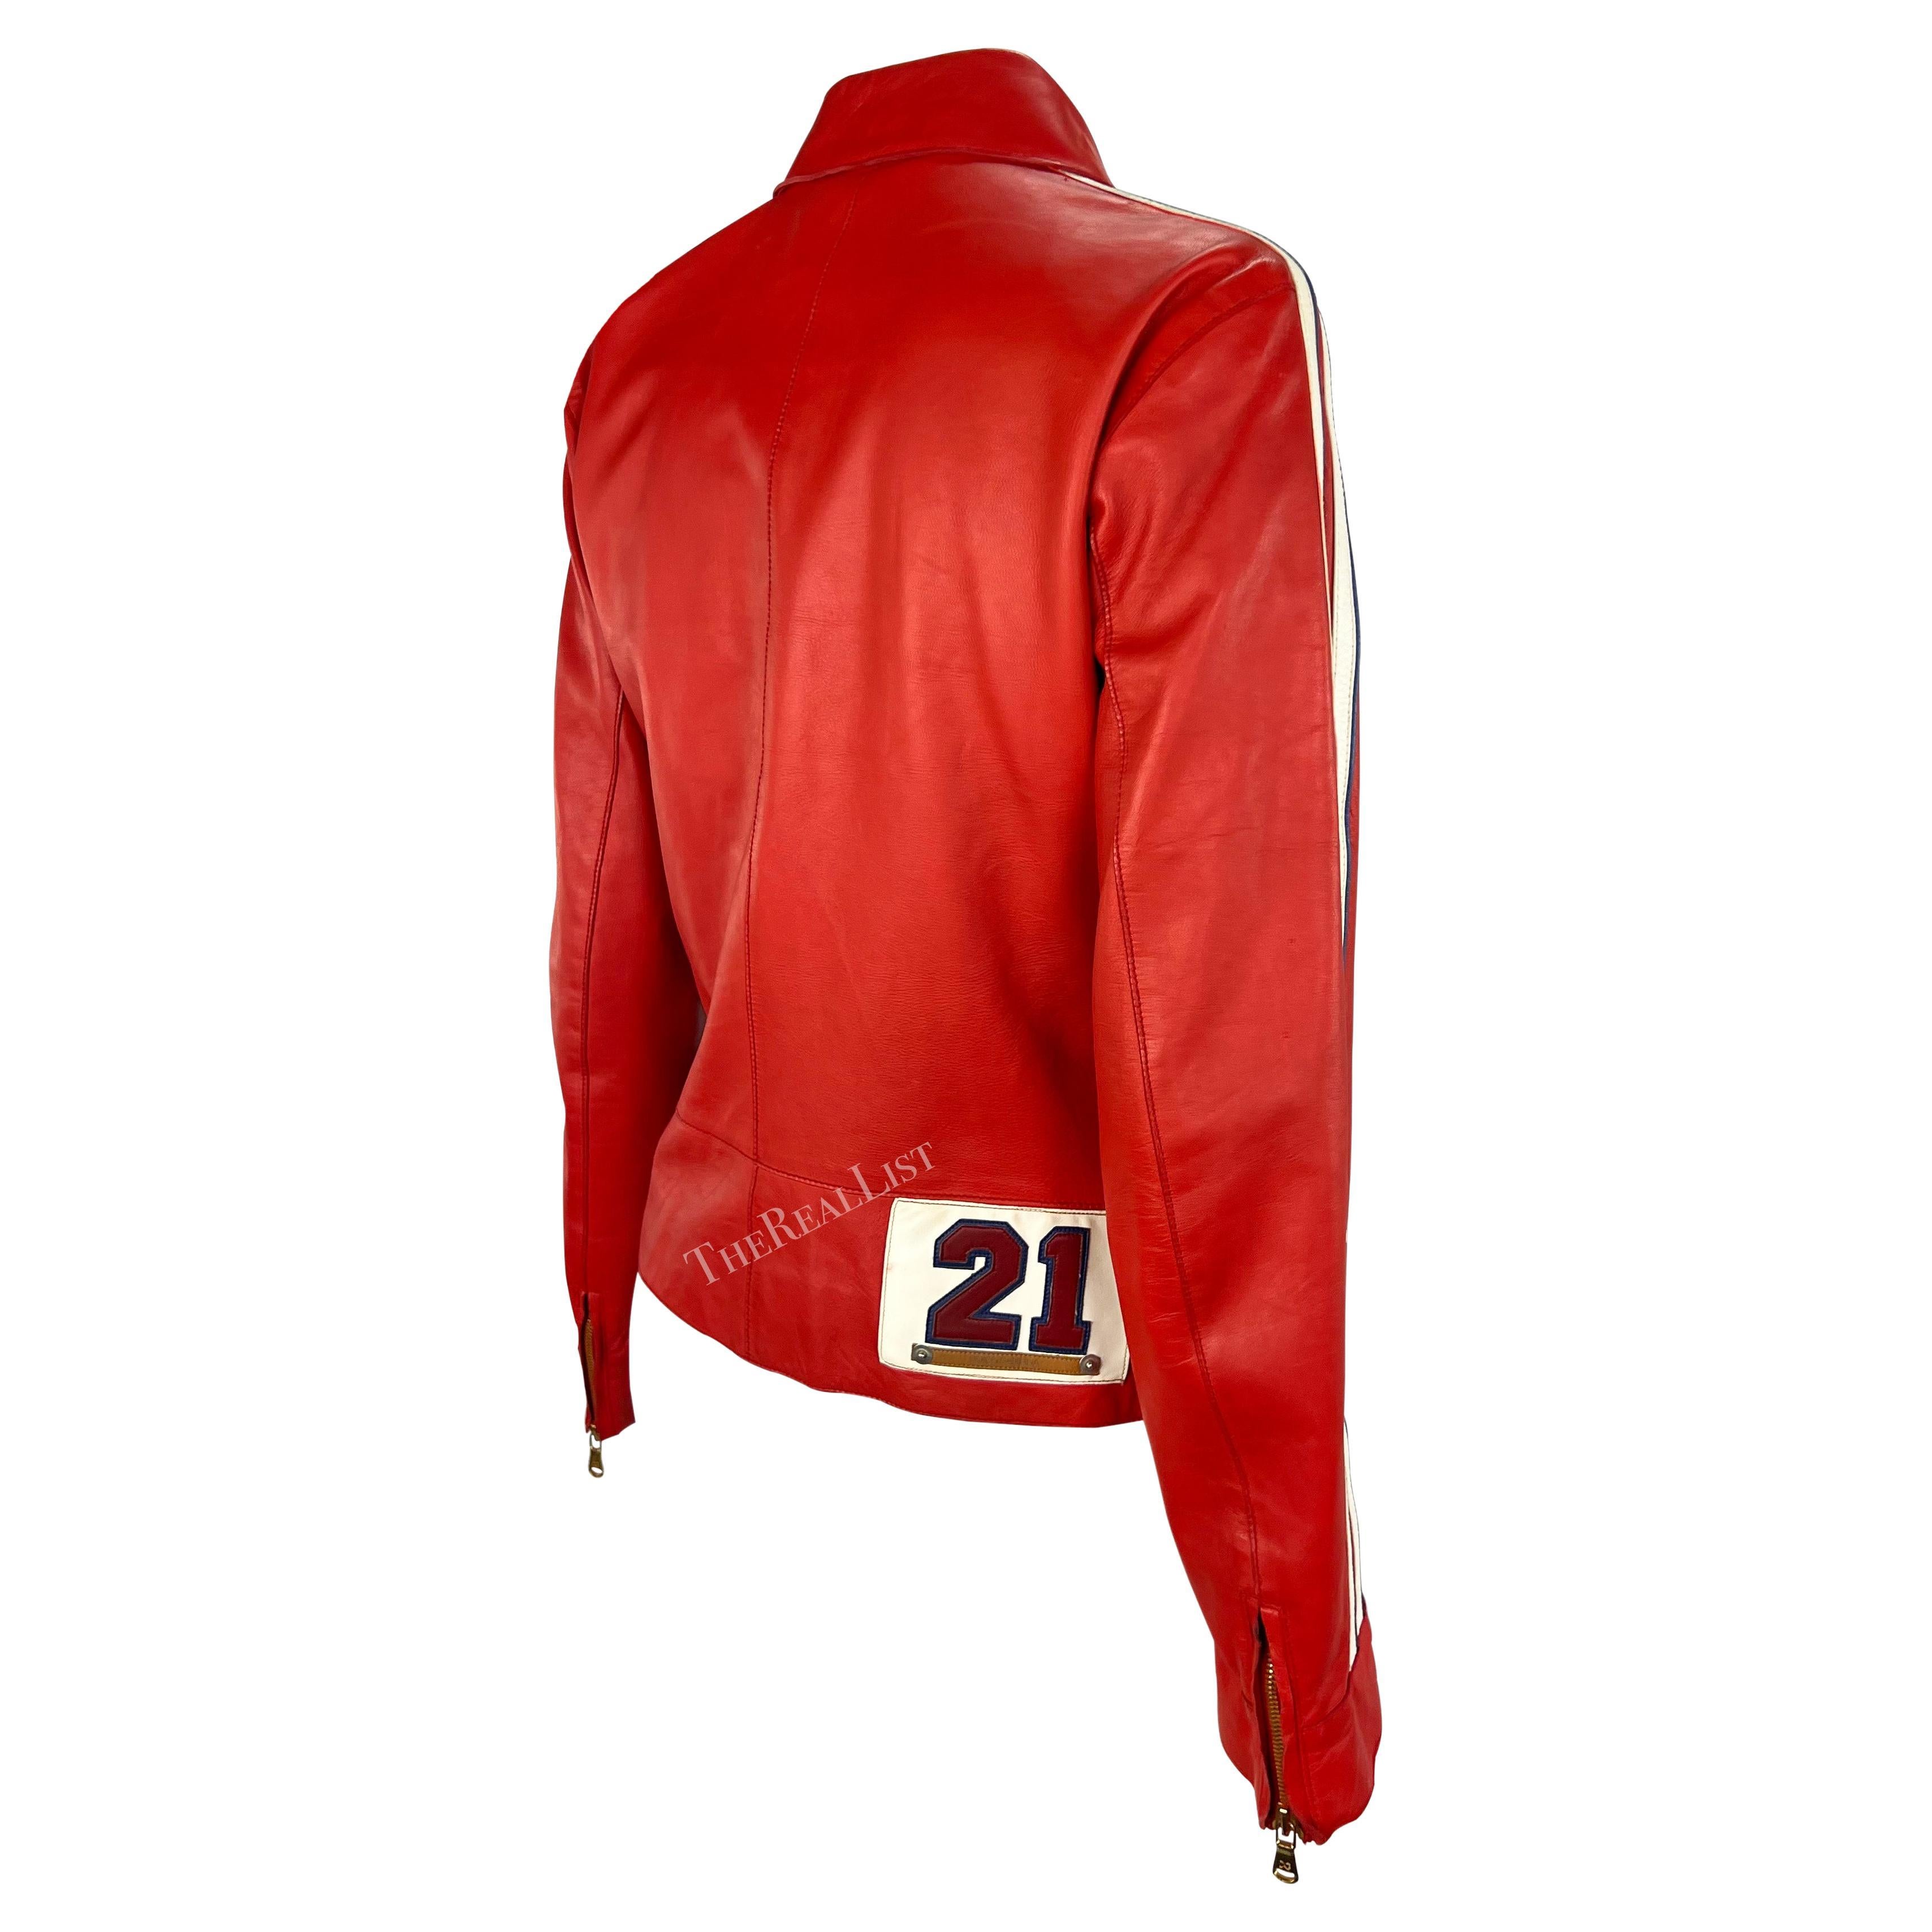 S/S 2001 Dolce & Gabbana Red Moto Style Leather Jacket